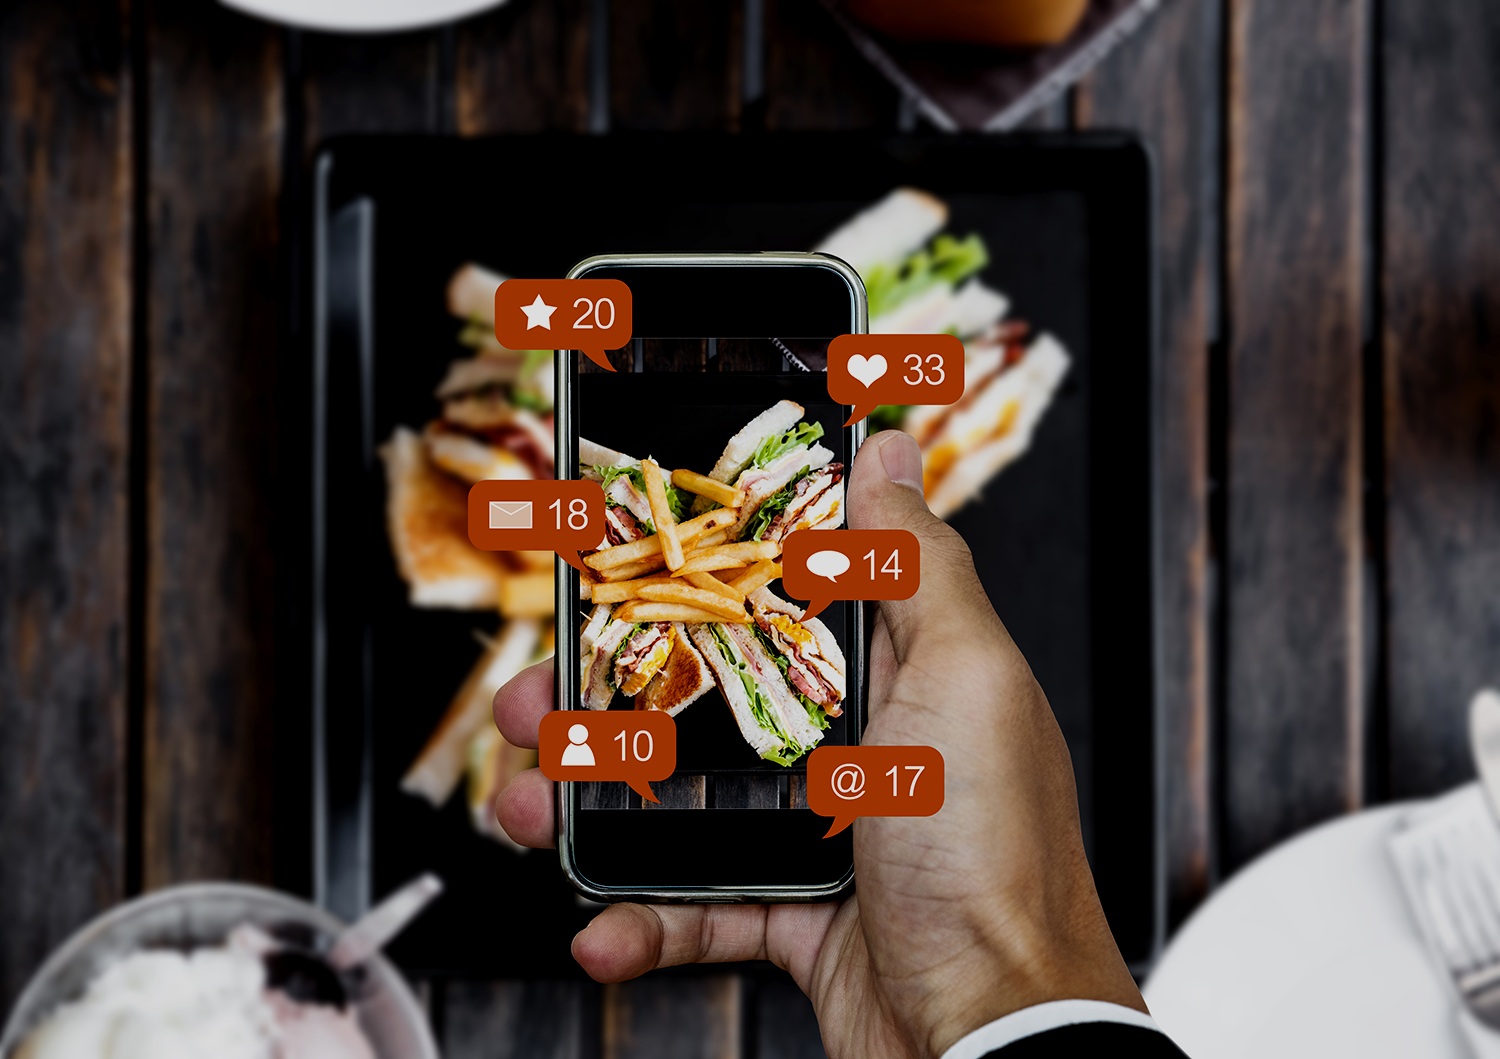 A hand holding a phone with image of food with notifications